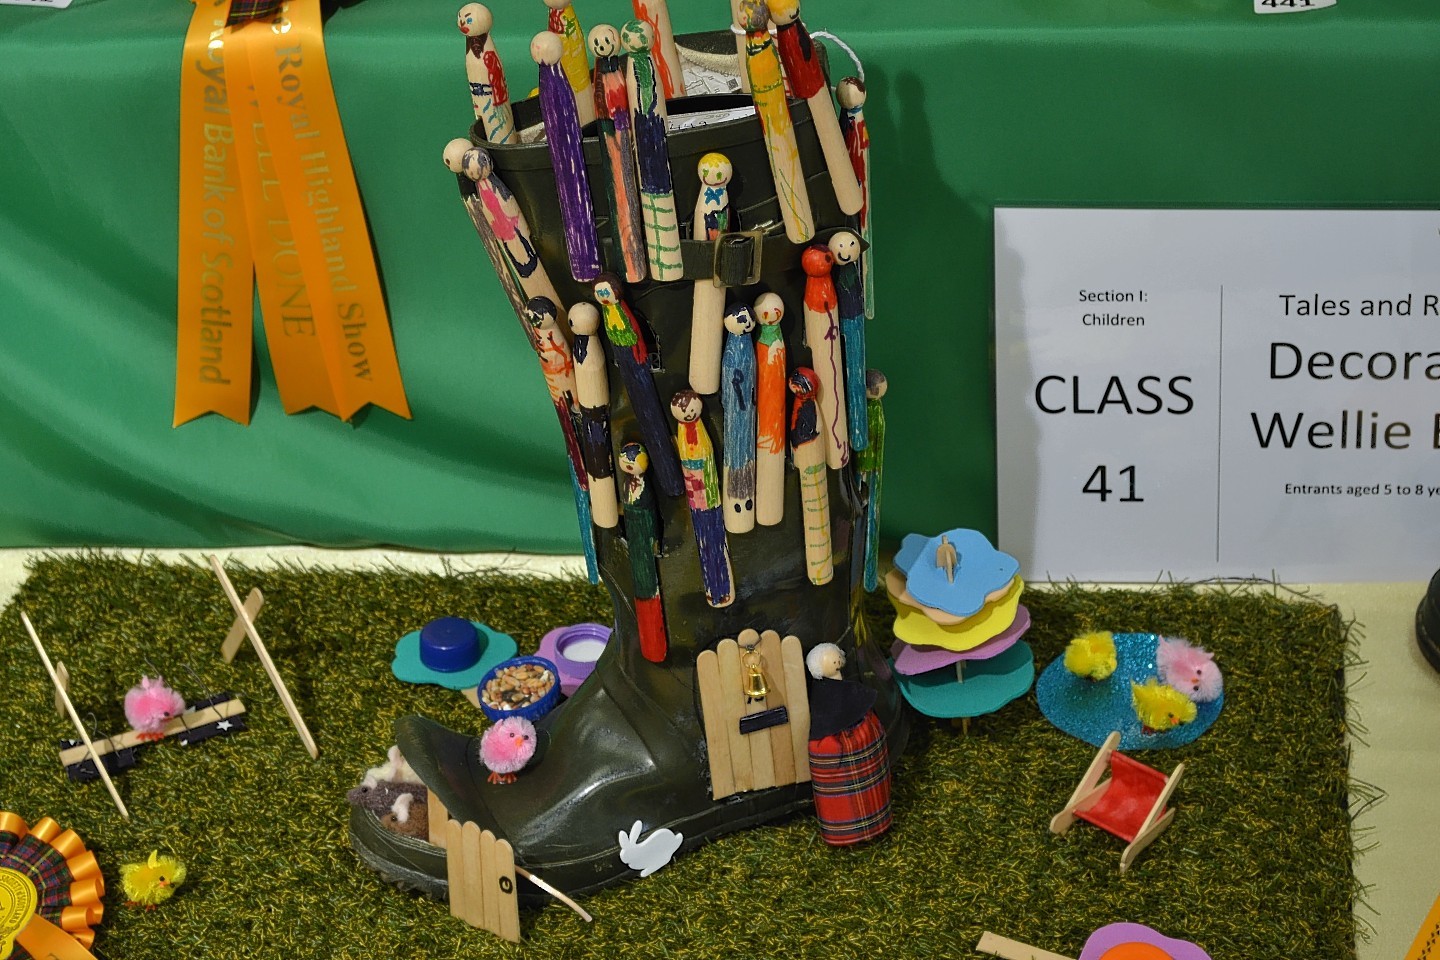 Northeast craft entries sought for Royal Highland Show